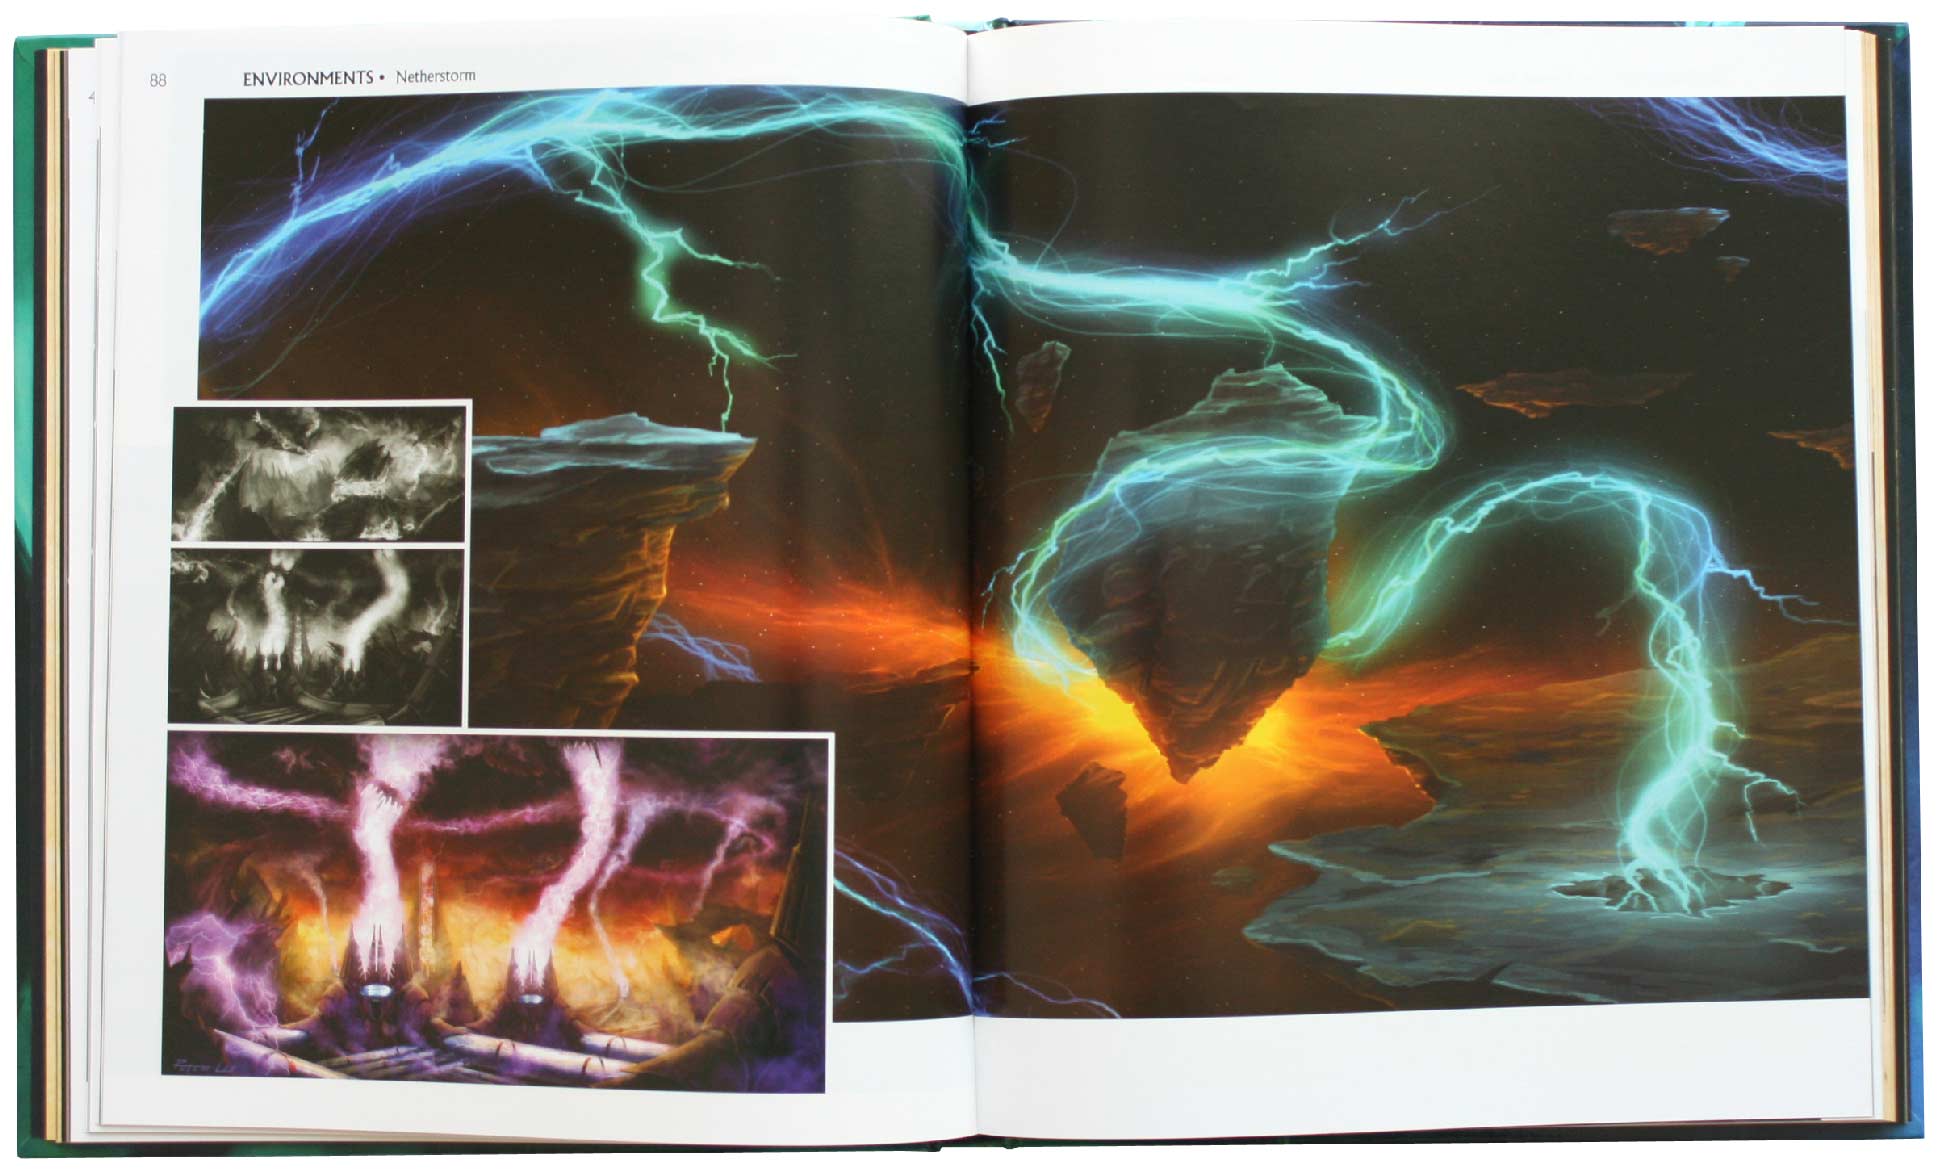 Page 88 et 89 de l'Art book : The Art of the Burning Crusade (World of Warcraft)